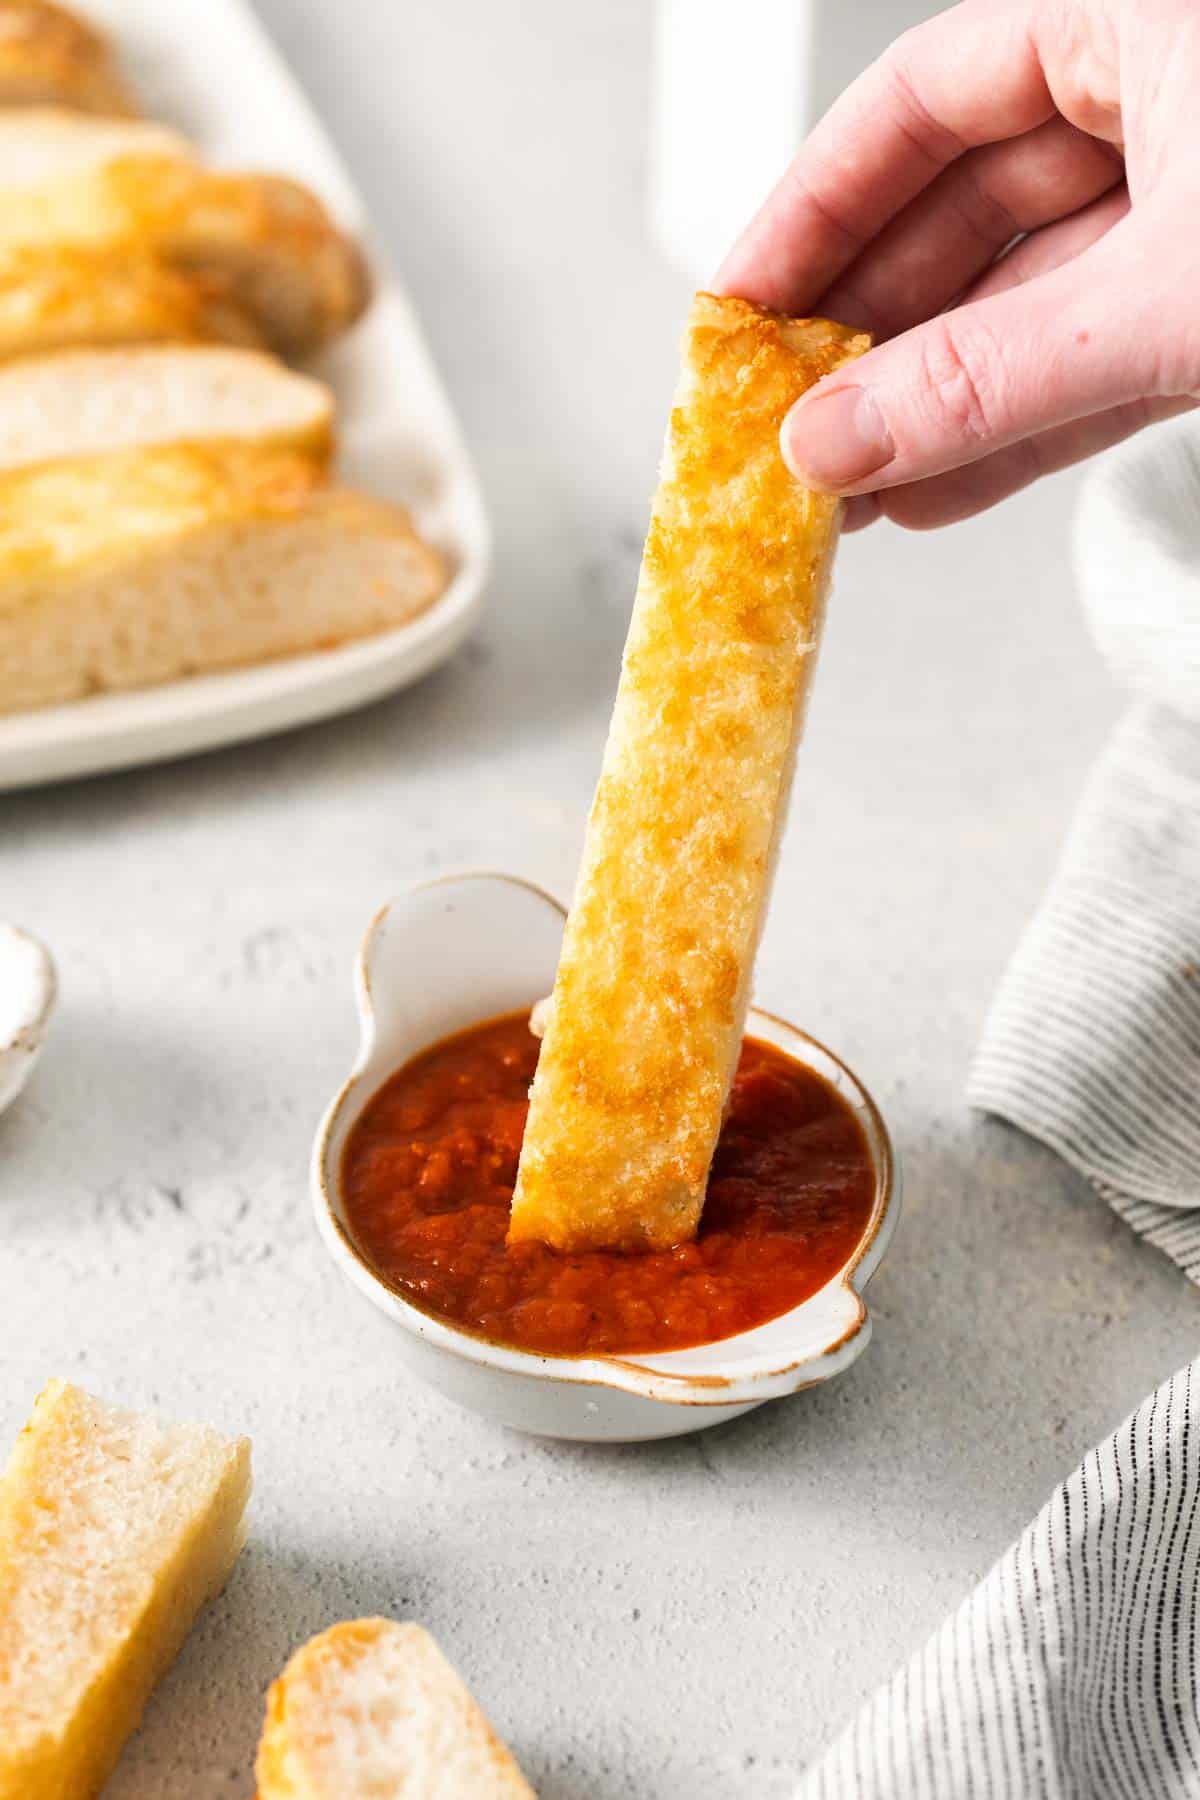 A hand dipping a breadstick in sauce